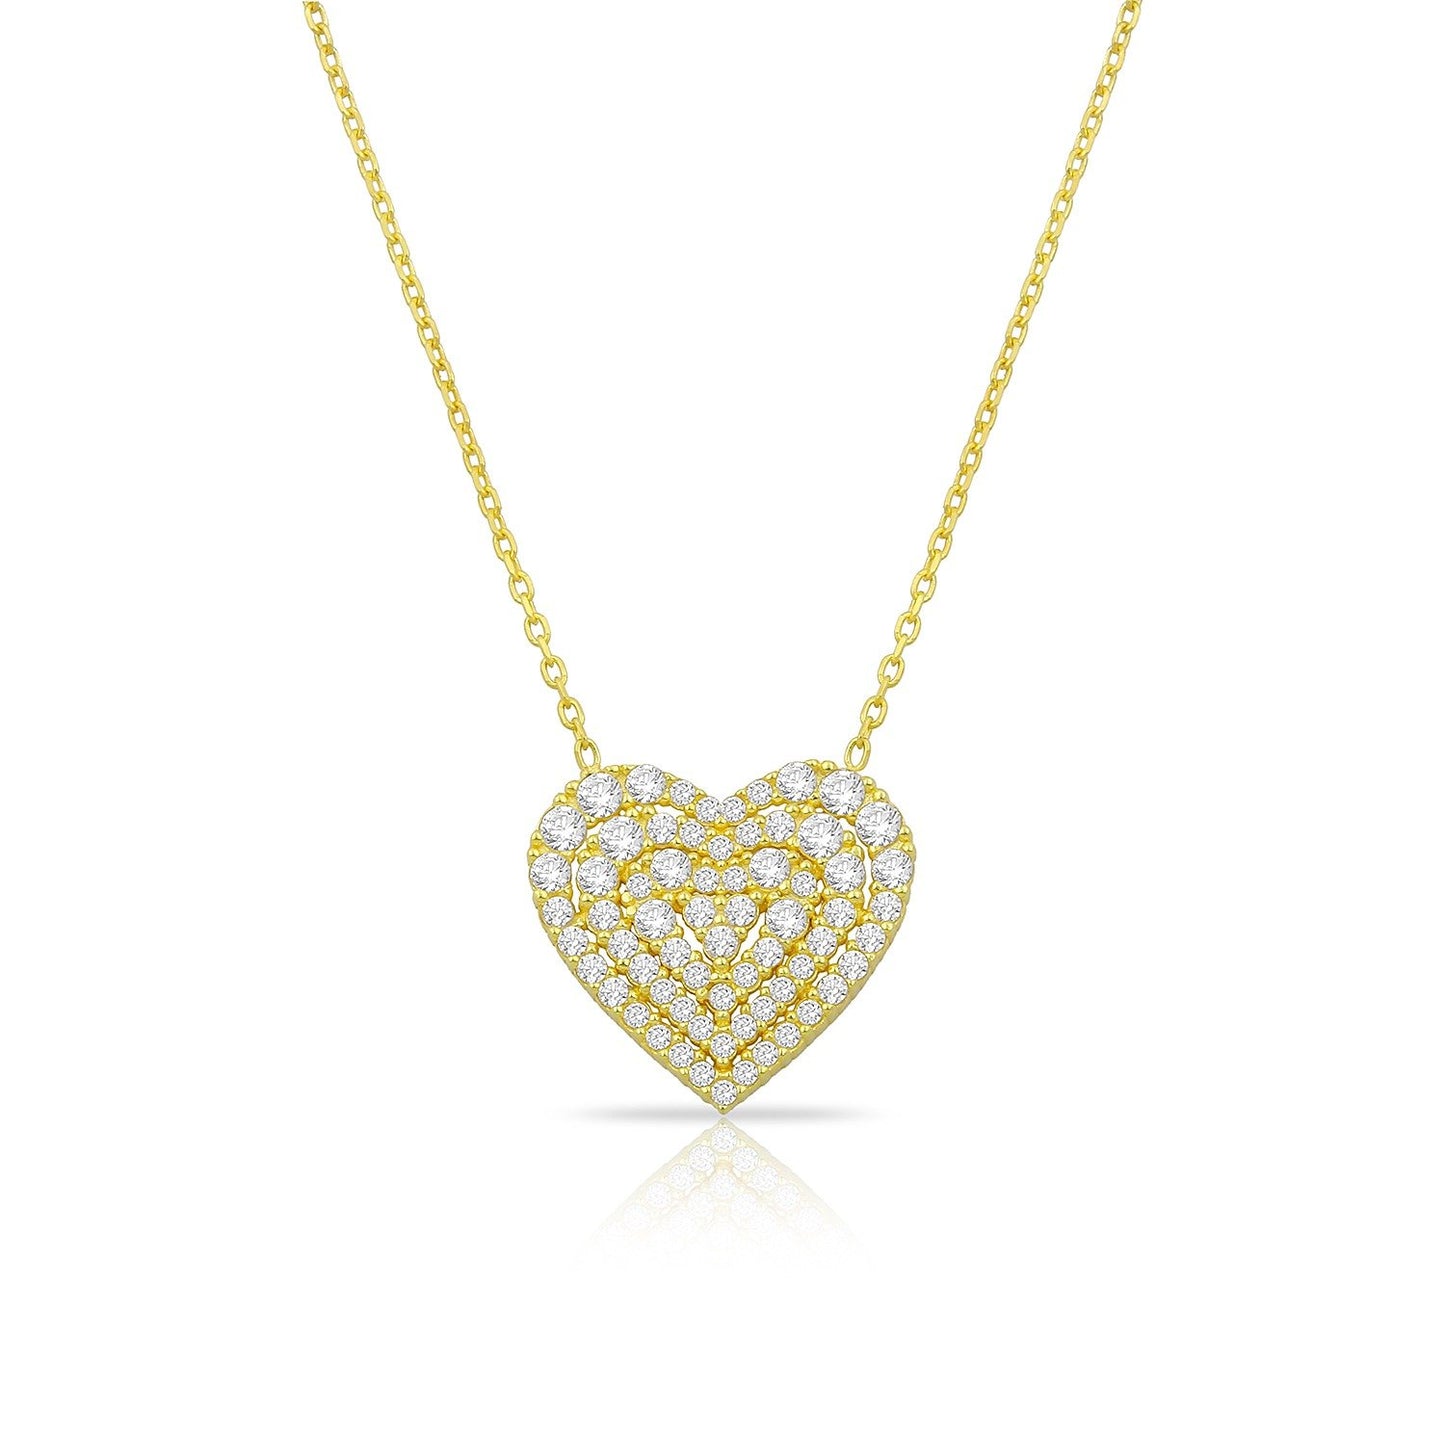 Sweetheart Crystal Heart Necklace JEWELRY The Sis Kiss 